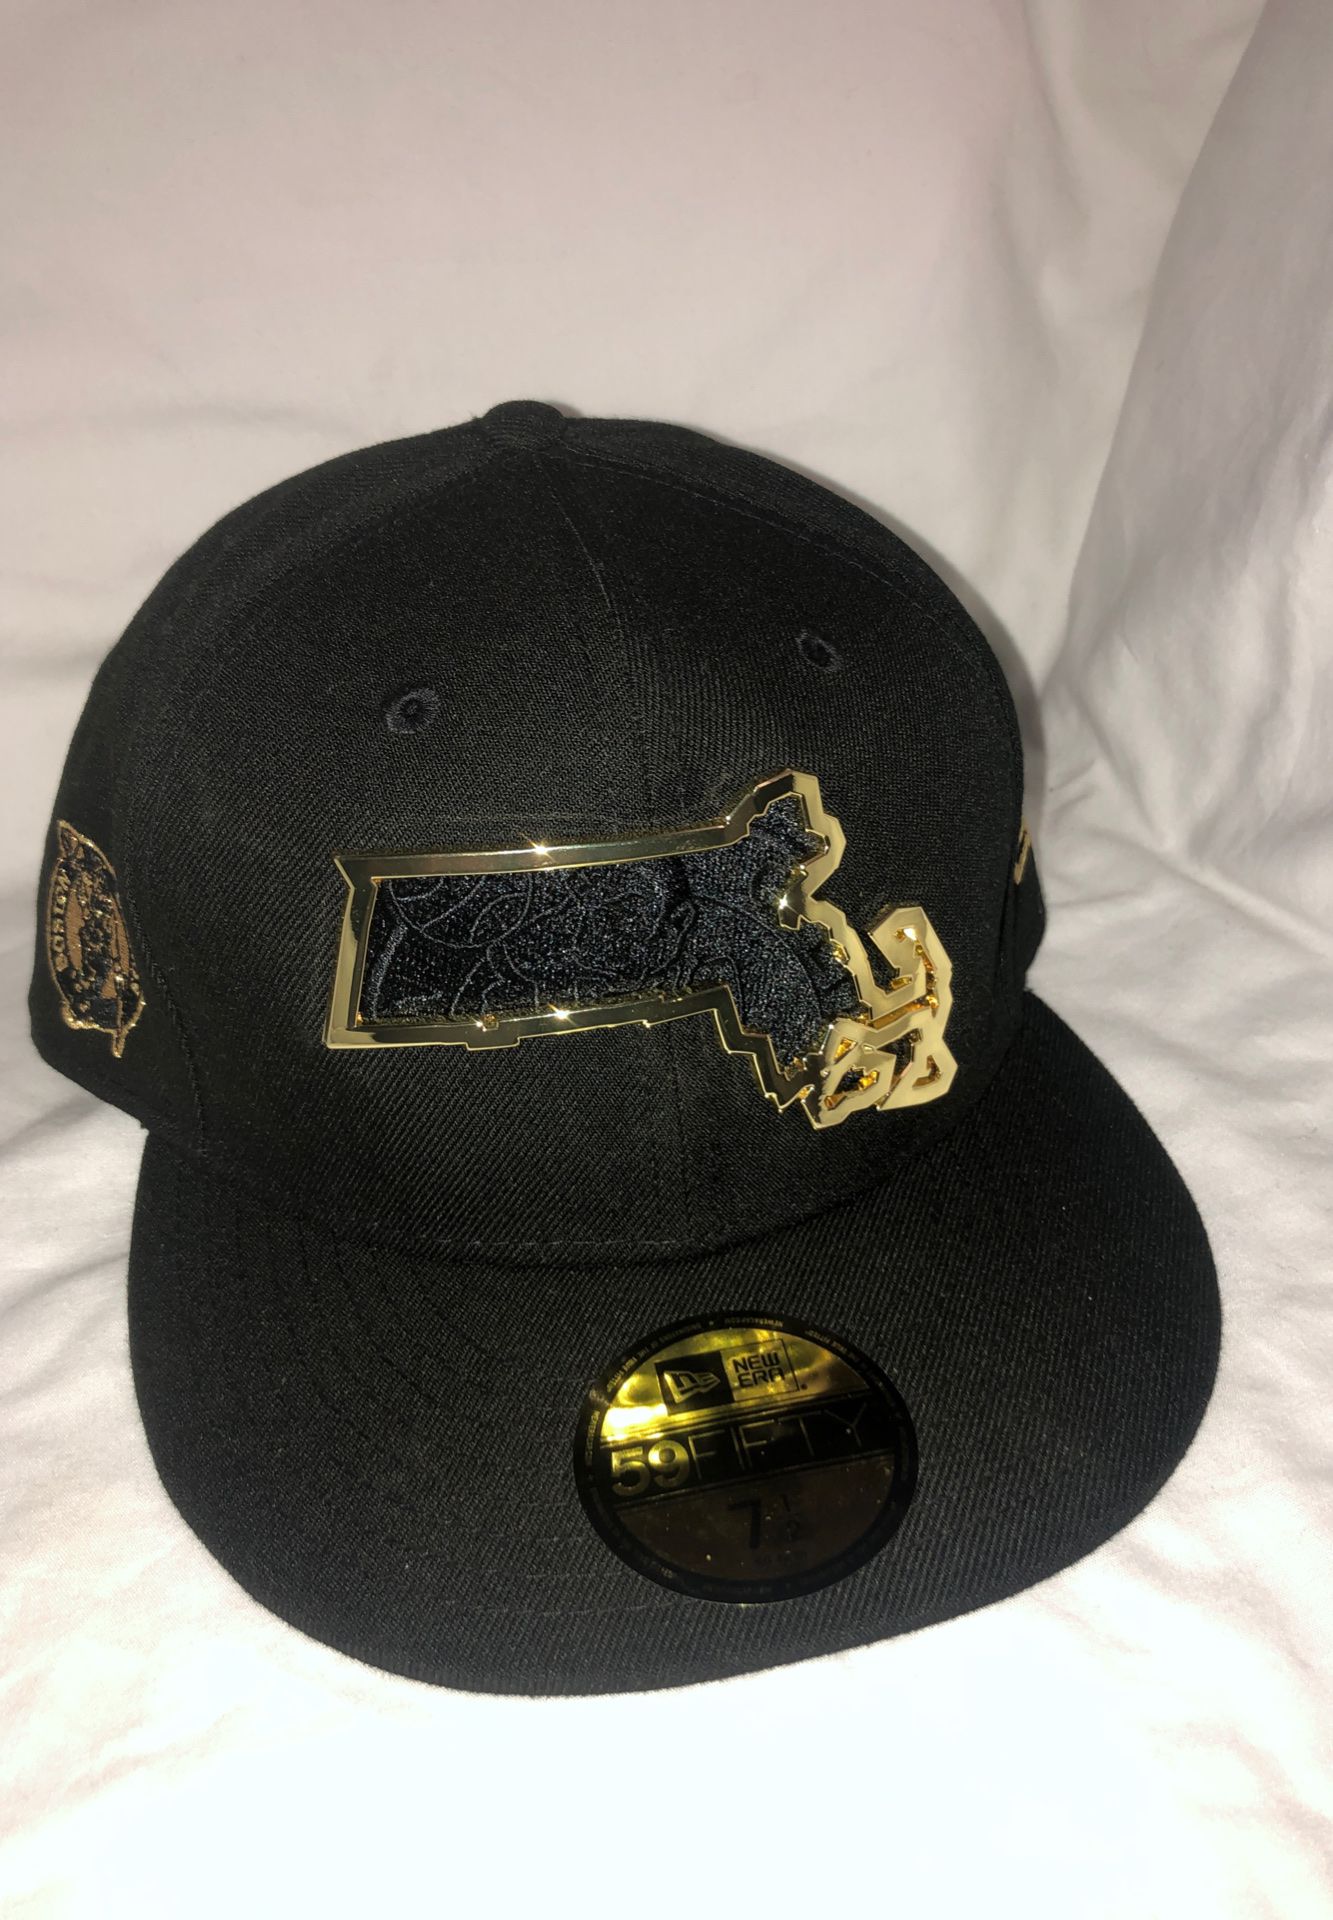 New Boston Celtics hat from New Era Pro Fit size 7 1/2 for Sale in  Sunnyvale, CA - OfferUp